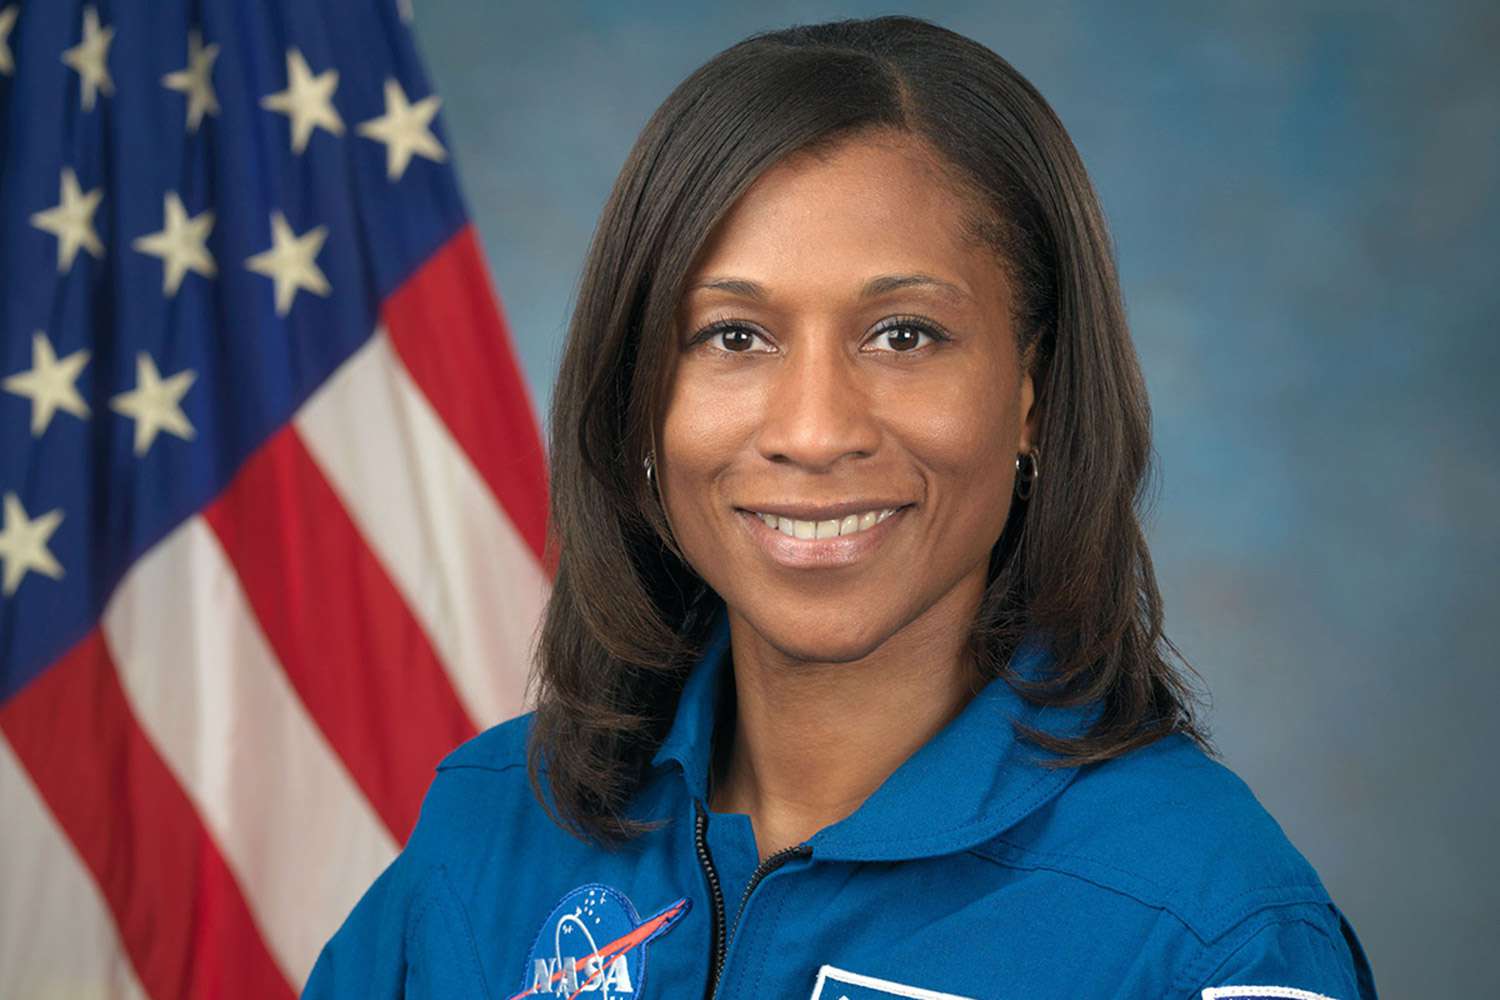 NASA Astronaut Jeanette Epps Will Become First Black Woman to Join International Space Station Crew